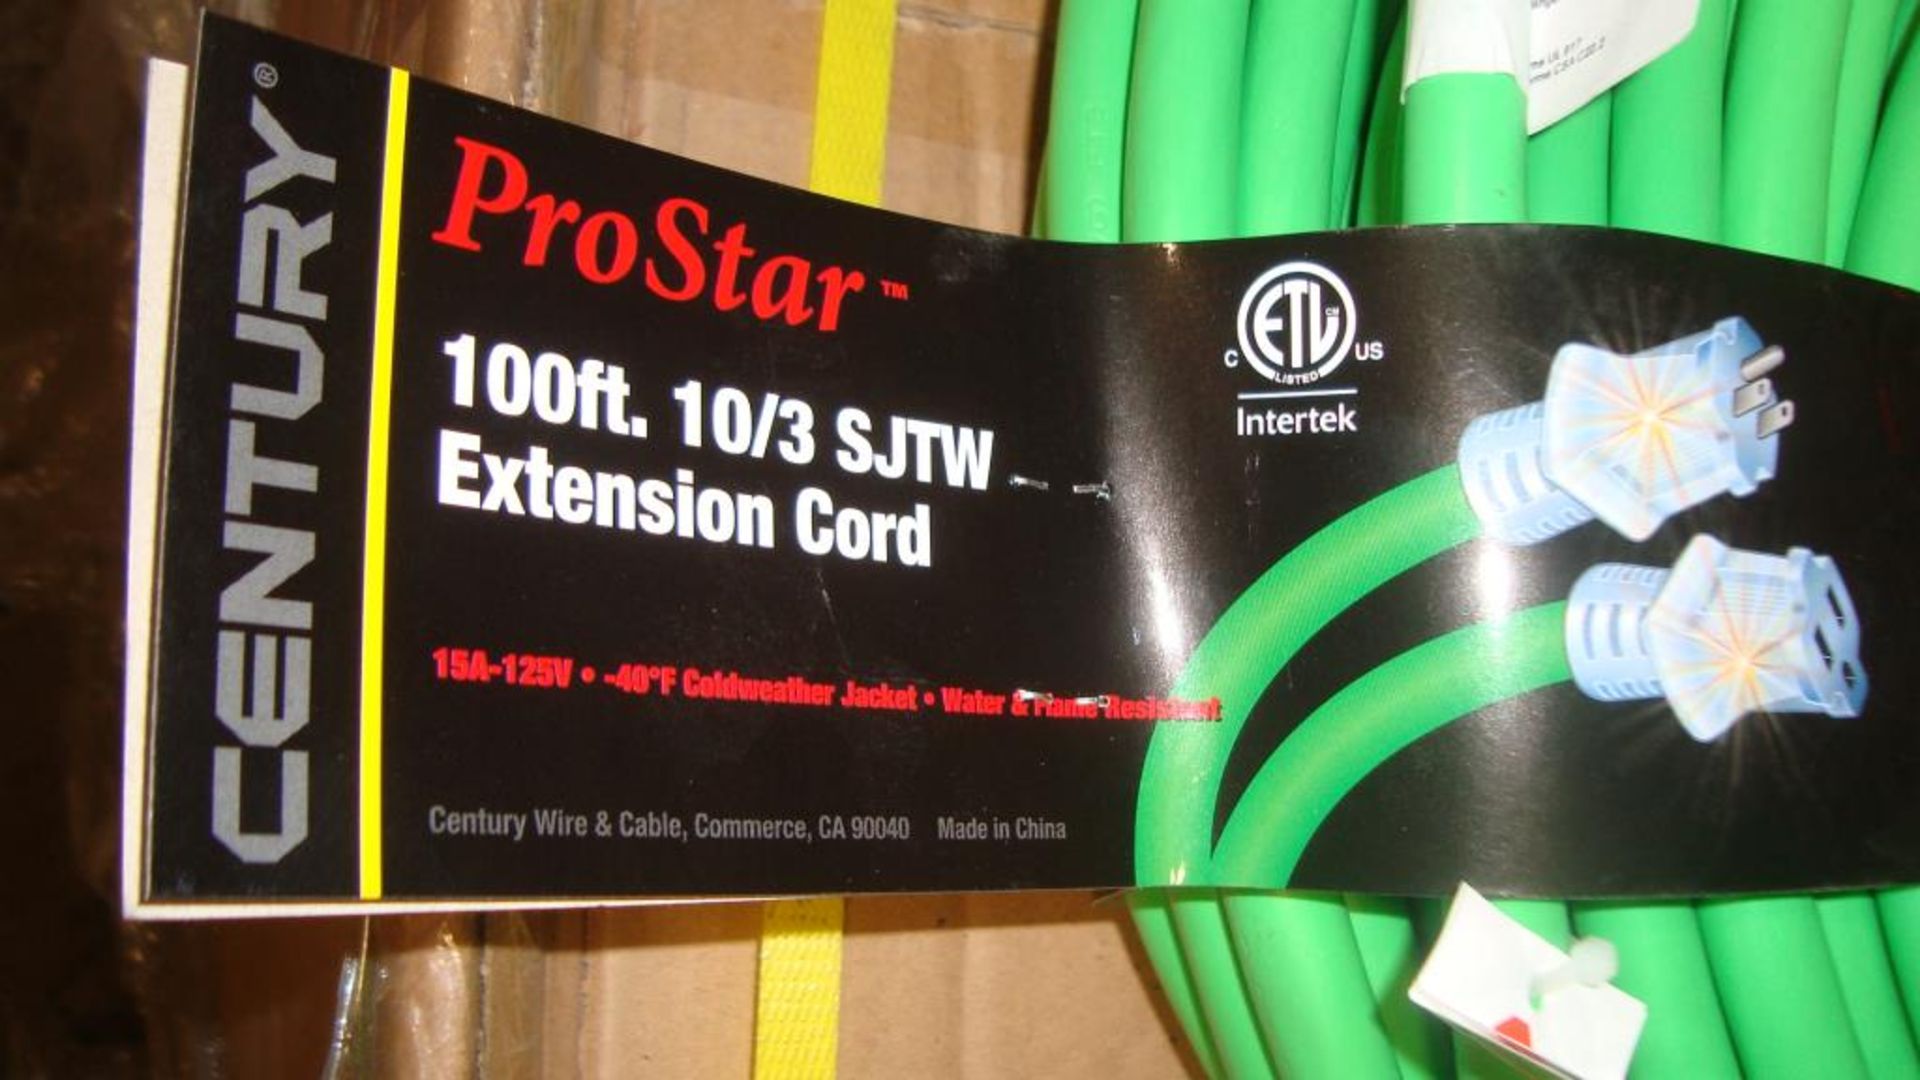 Extension Cords. Lot: 54 Total (18 Boxes -3 ea.) Century Wire & Cable pn# D11710100GN Pro Star Heavy - Image 3 of 6